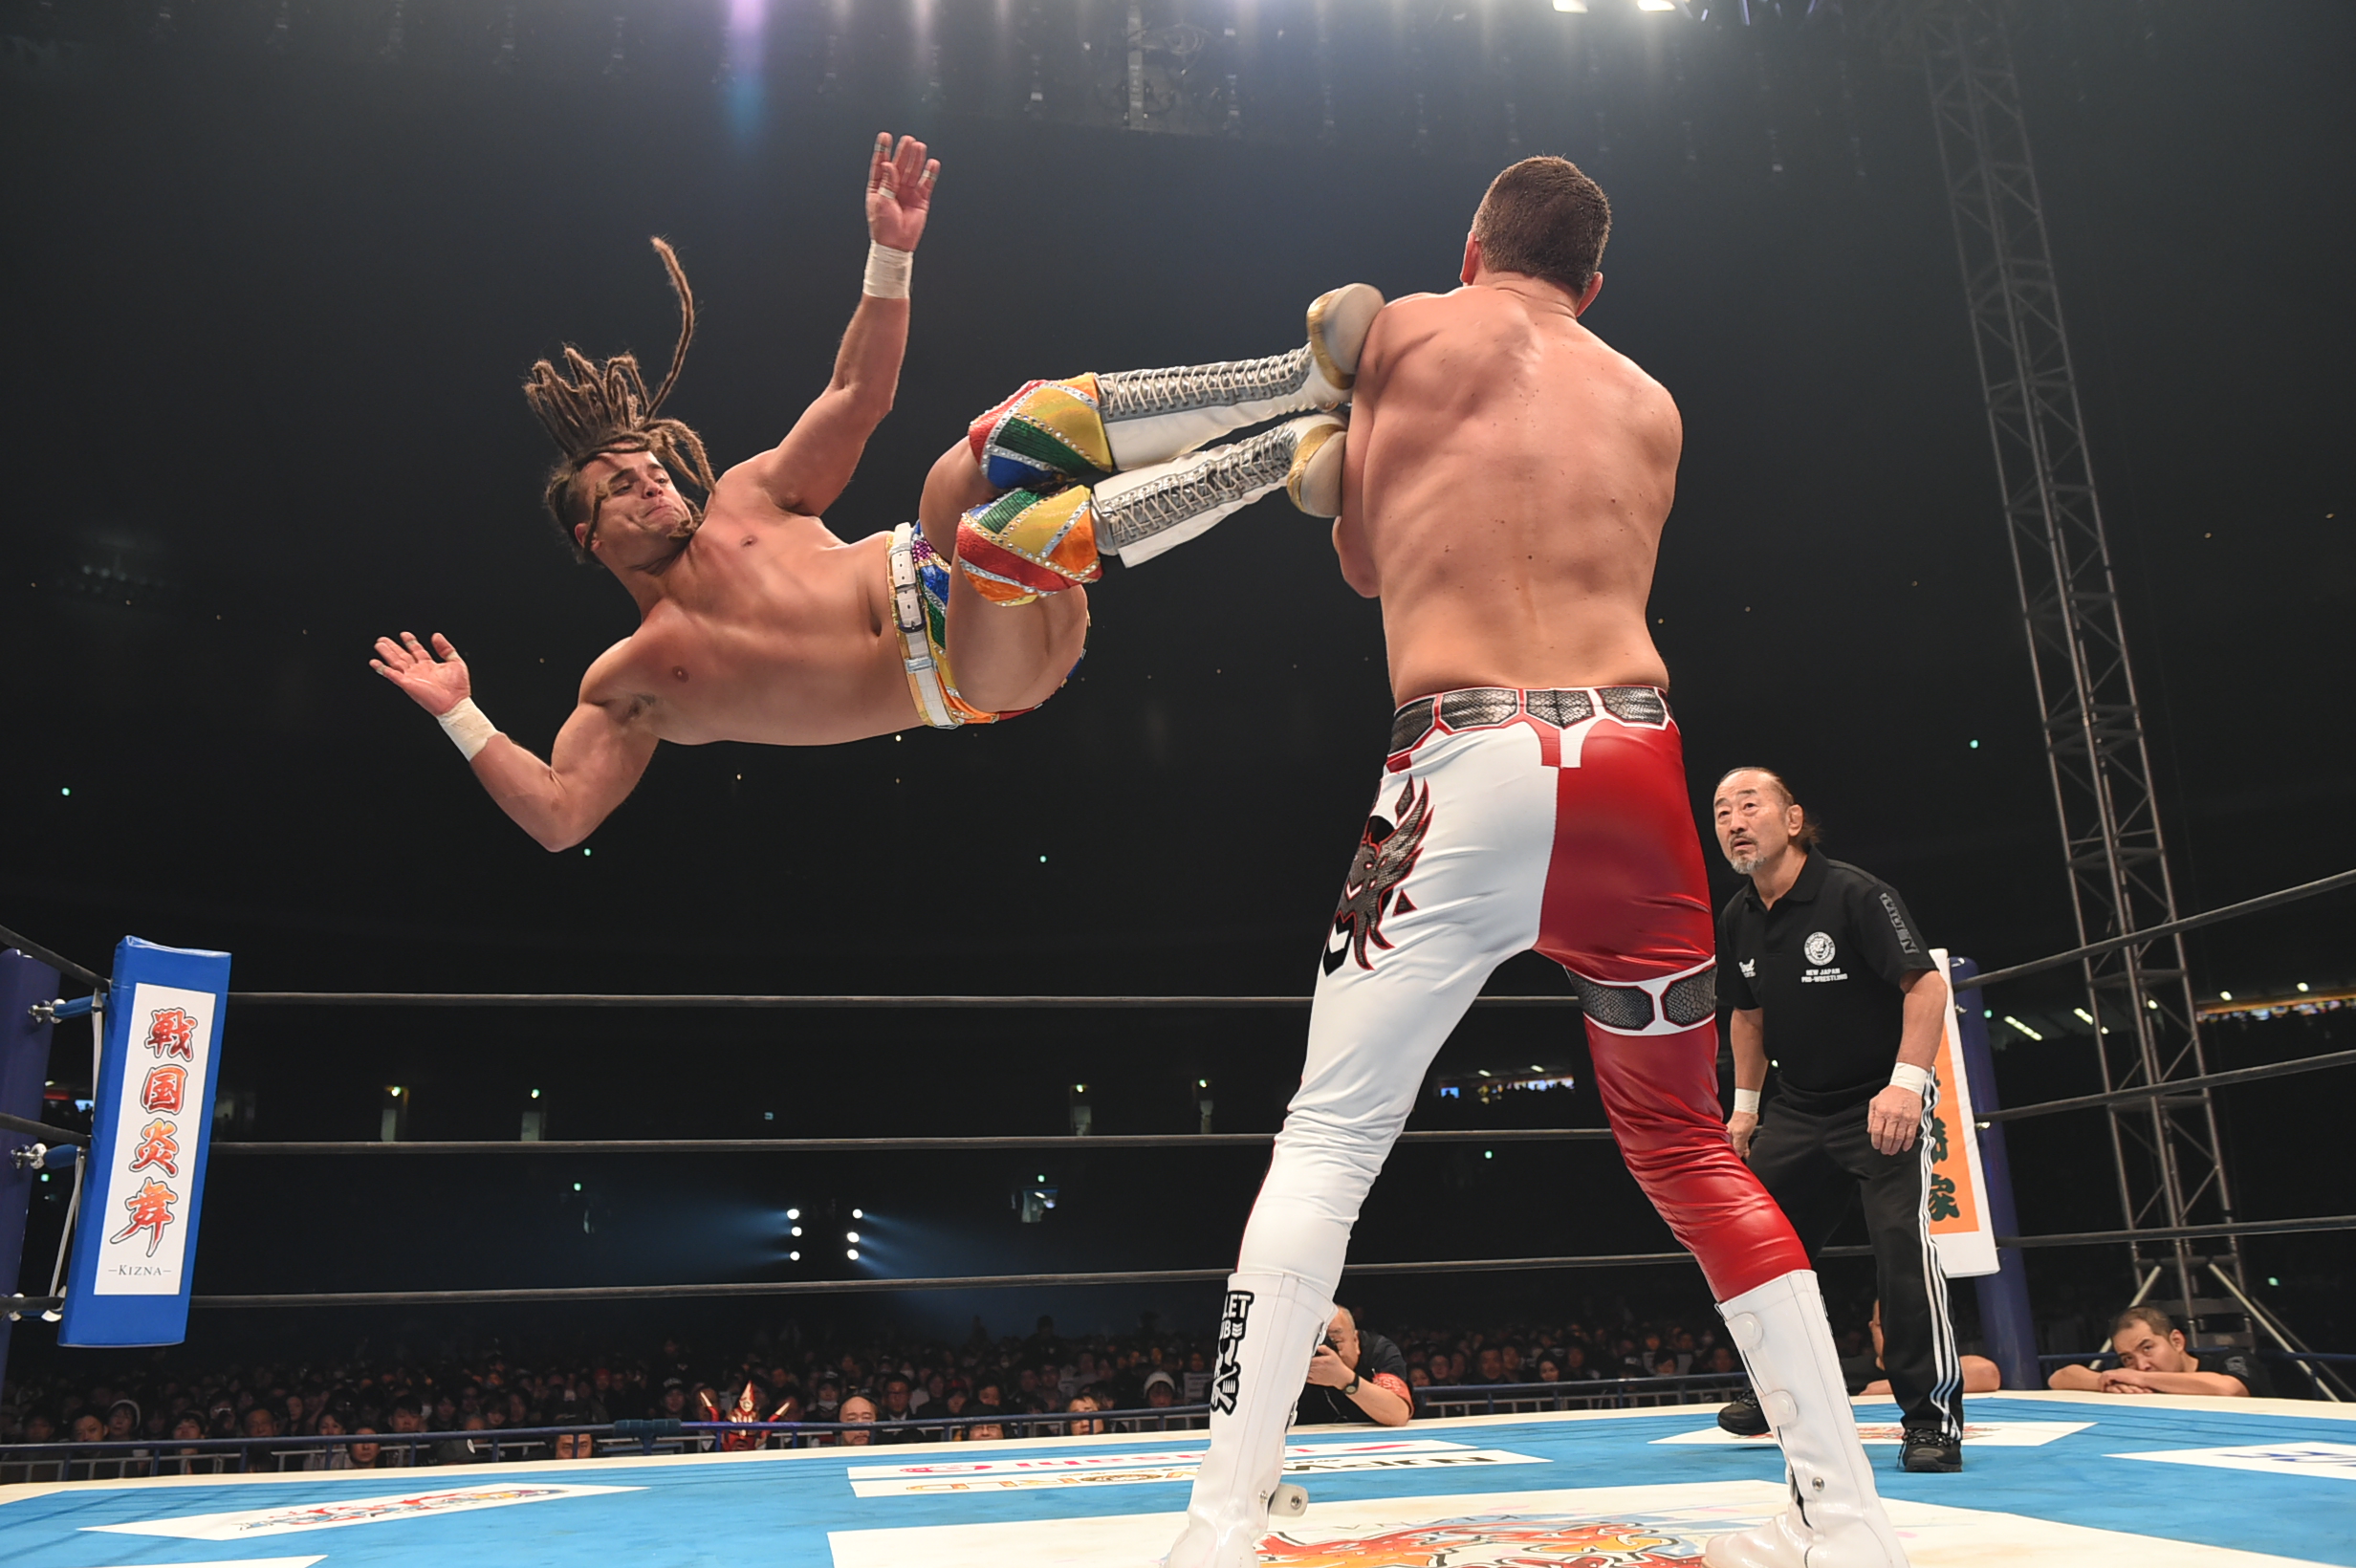 Powerful Promo From Juice Robinson (Video)